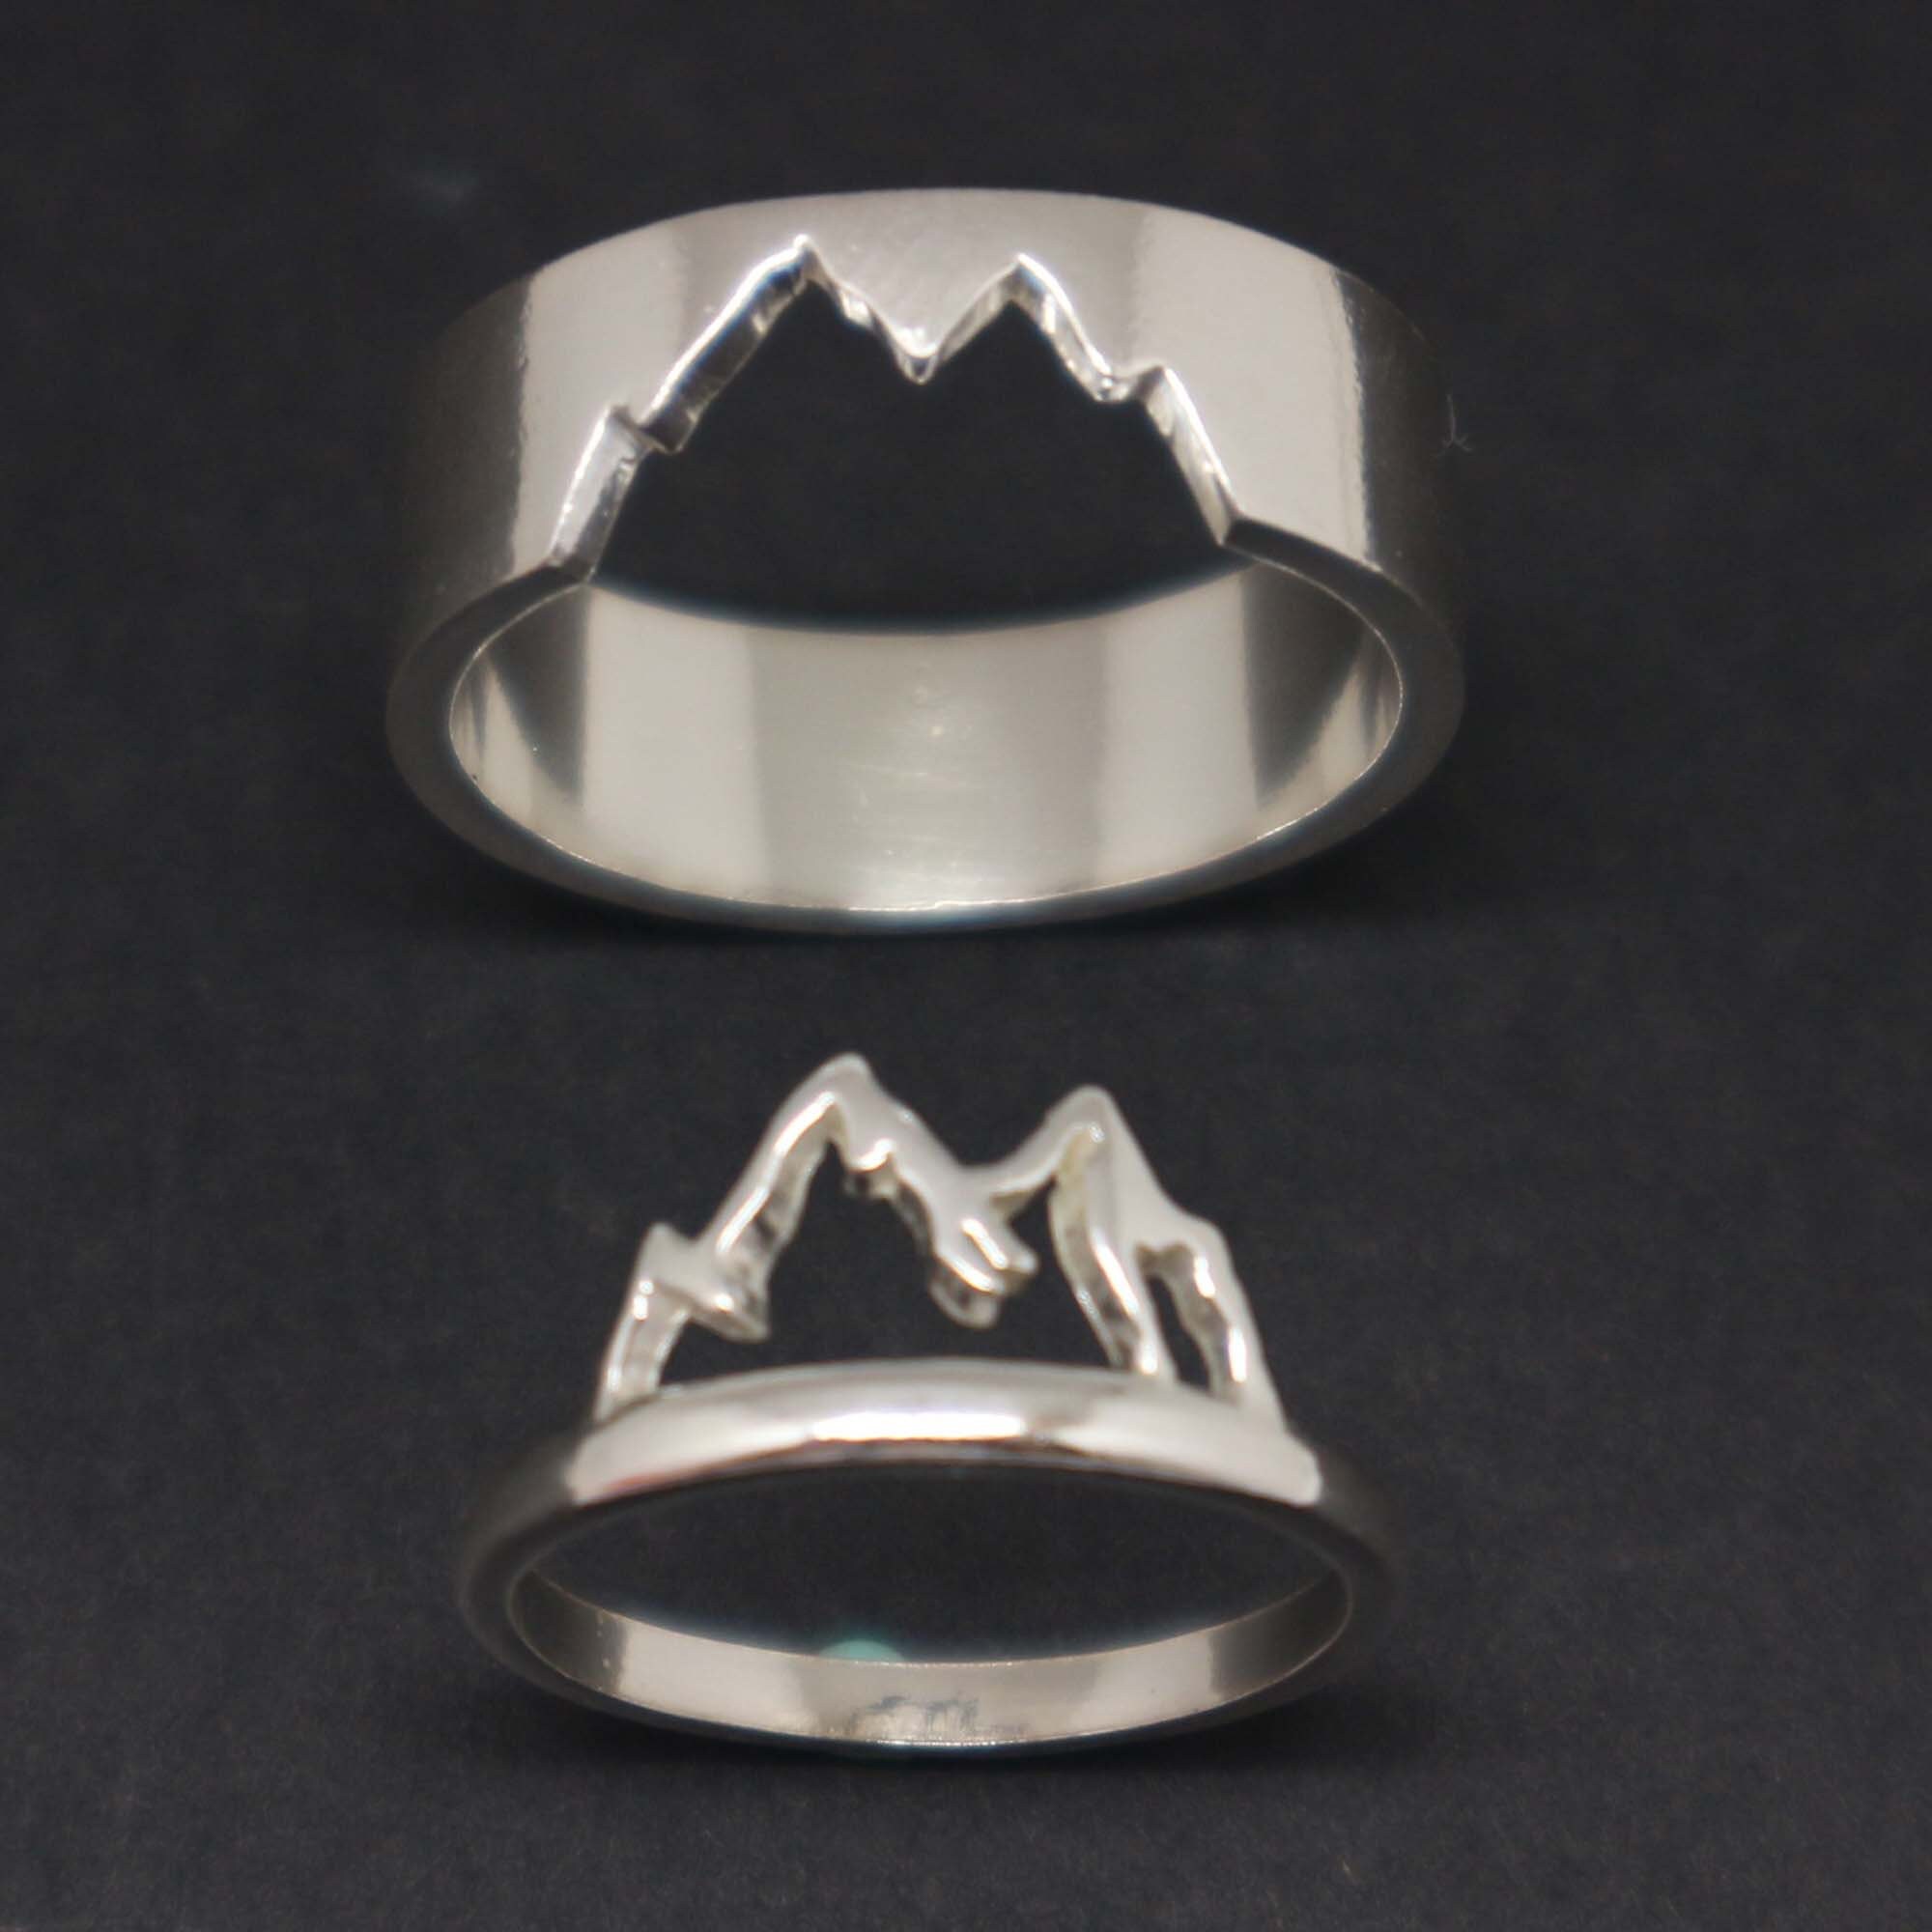 Buy For Less 925 Sterling Silver Mountain Ring 